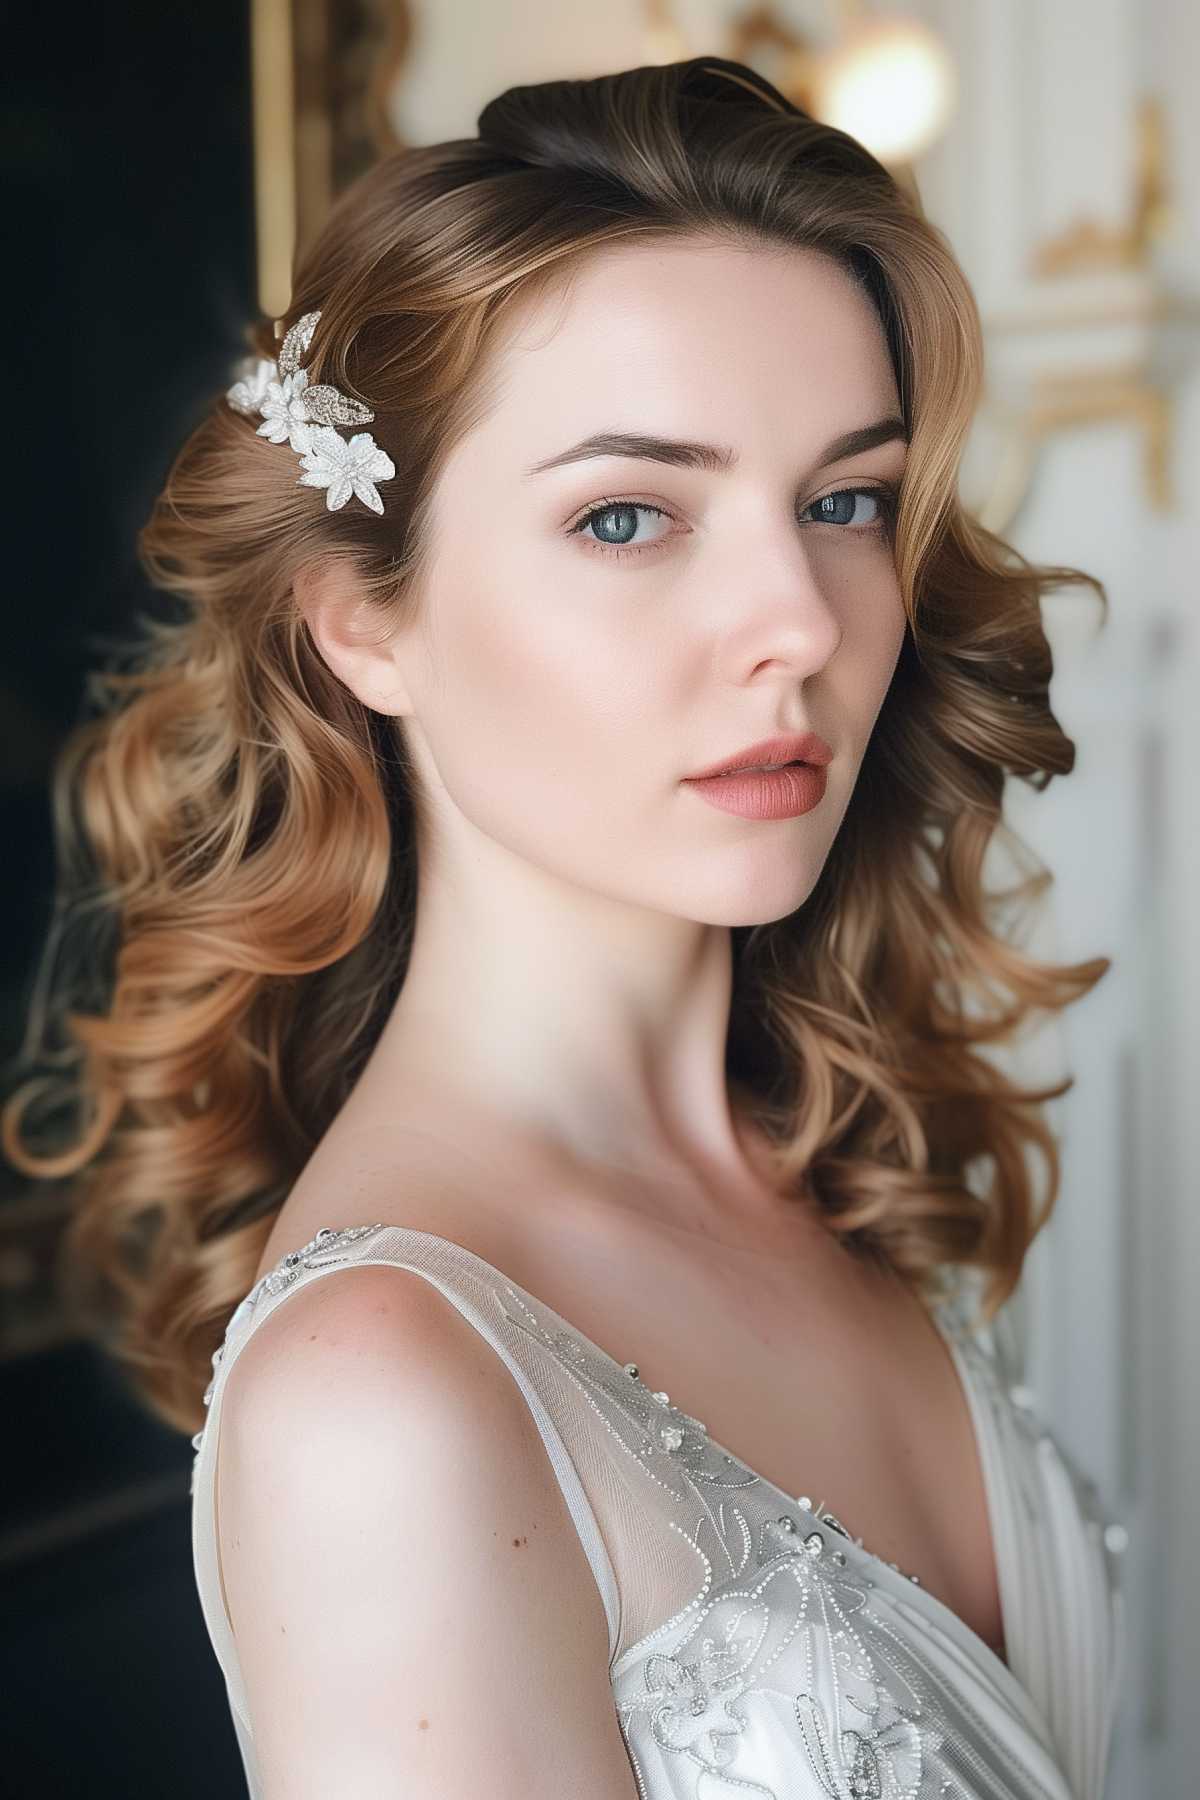 Elegant woman with layered waves and a decorative side pin, creating a romantic and voluminous hairstyle suitable for special events.